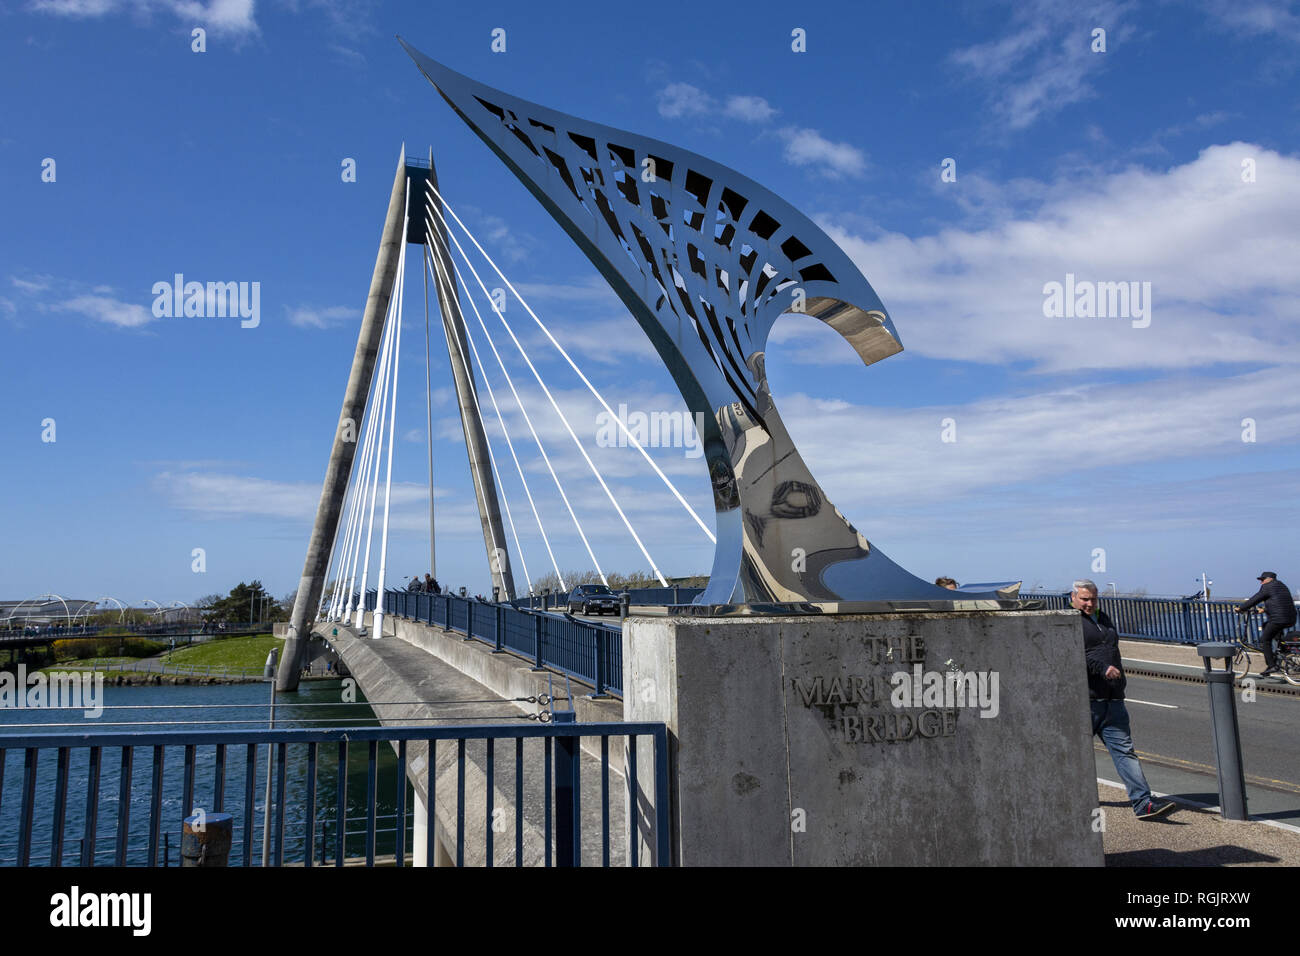 The Marine Way Bridge in Southport, England. Designed by Babtie with architect Nicol Russell Studios and was opened in 2004 Stock Photo